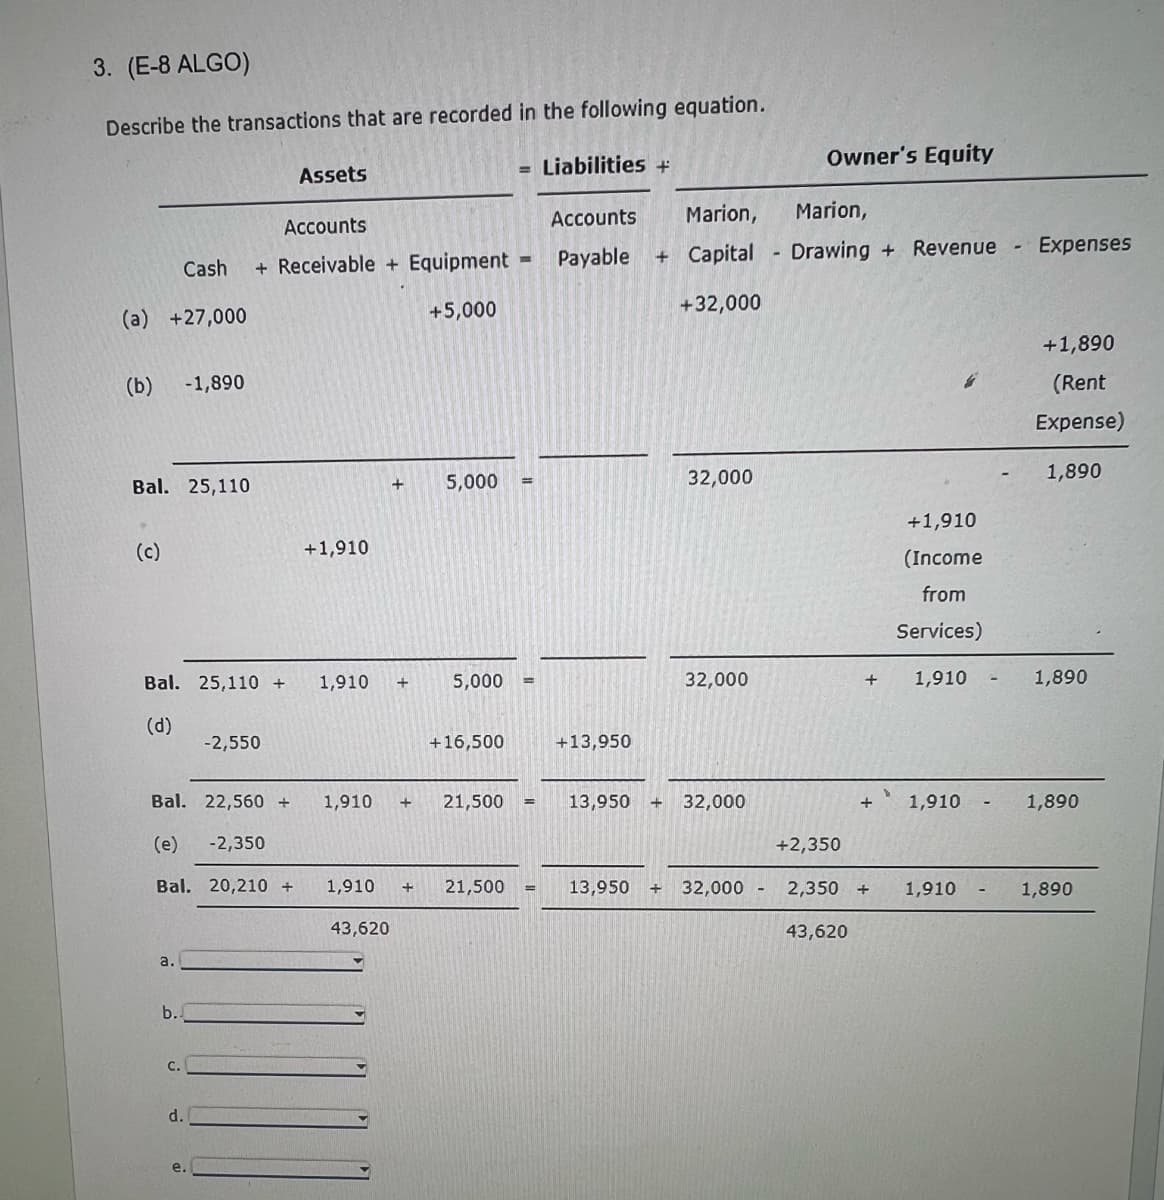 3. (E-8 ALGO)
Describe the transactions that are recorded in the following equation.
Assets
= Liabilities +
Owner's Equity
Accounts
Accounts
Marion,
Marion,
Cash
(a) +27,000
+ Receivable + Equipment
Payable
+ Capital
Drawing + Revenue
Expenses
+5,000
+32,000
(b)
-1,890
Bal. 25,110
(c)
+ 5,000
32,000
+1,910
+1,910
(Income
from
+1,890
(Rent
Expense)
1,890
Services)
32,000
+
1,910
1,890
Bal. 25,110 + 1,910
+
5,000
(d)
-2,550
+16,500
+13,950
Bal. 22,560 +
1,910
+ 21,500 =
13,950
+
32,000
+ 1,910
1,890
(e) -2,350
+2,350
Bal. 20,210 +
1,910
+
21,500
13,950
32,000 - 2,350 + 1,910
1,890
43,620
43,620
a.
b..
C.
d.
e.